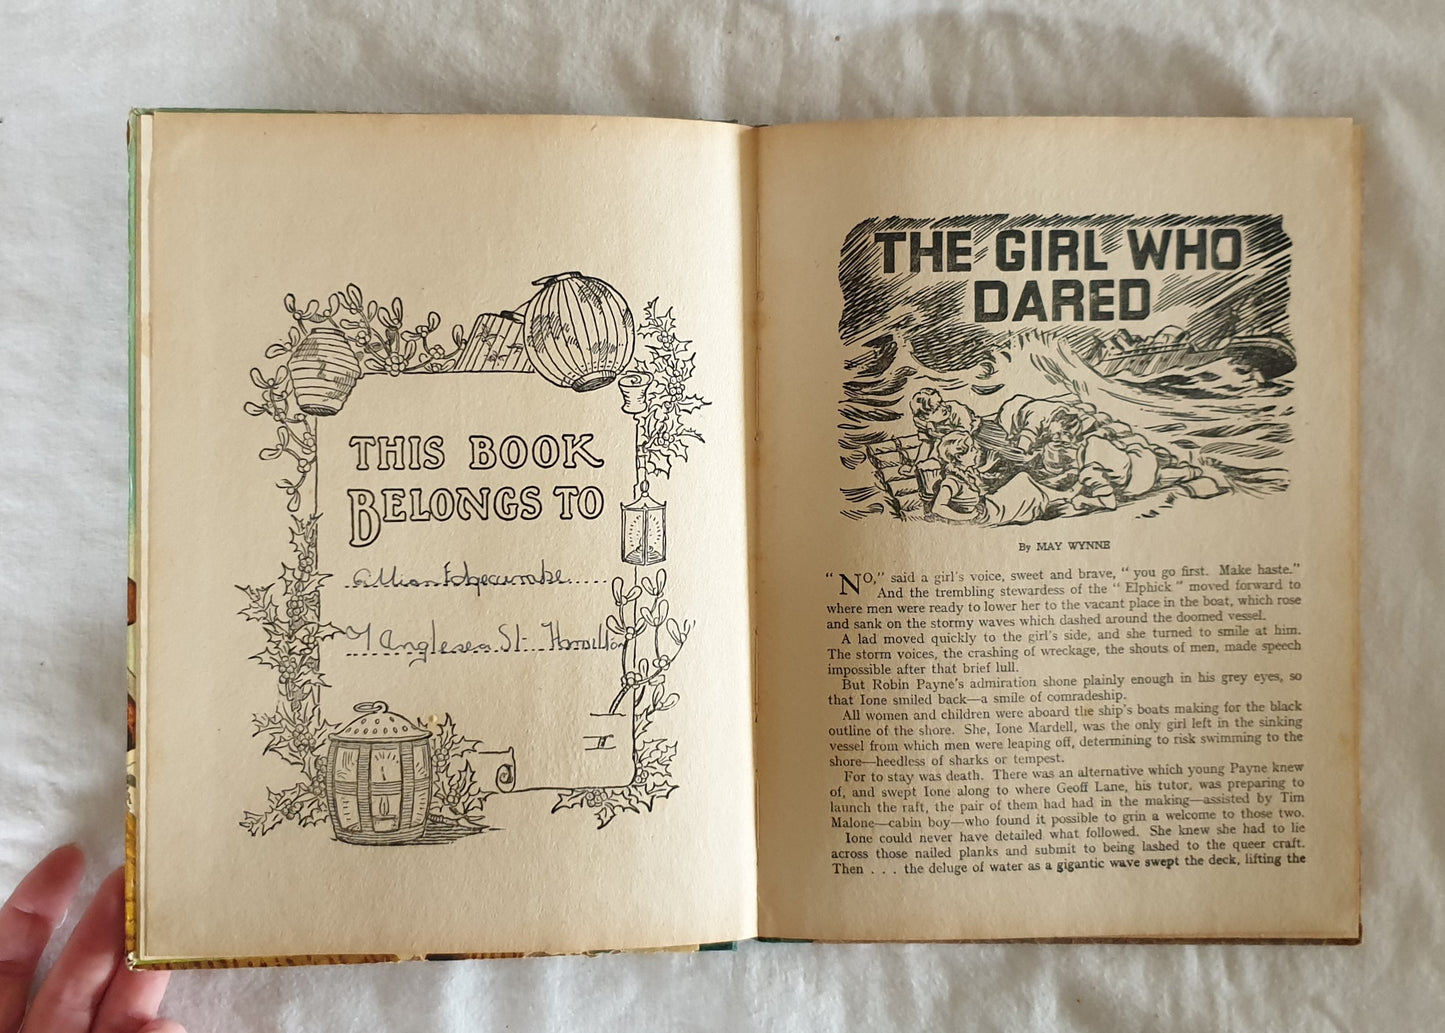 Our Girls' Tales by Renwick of Otley